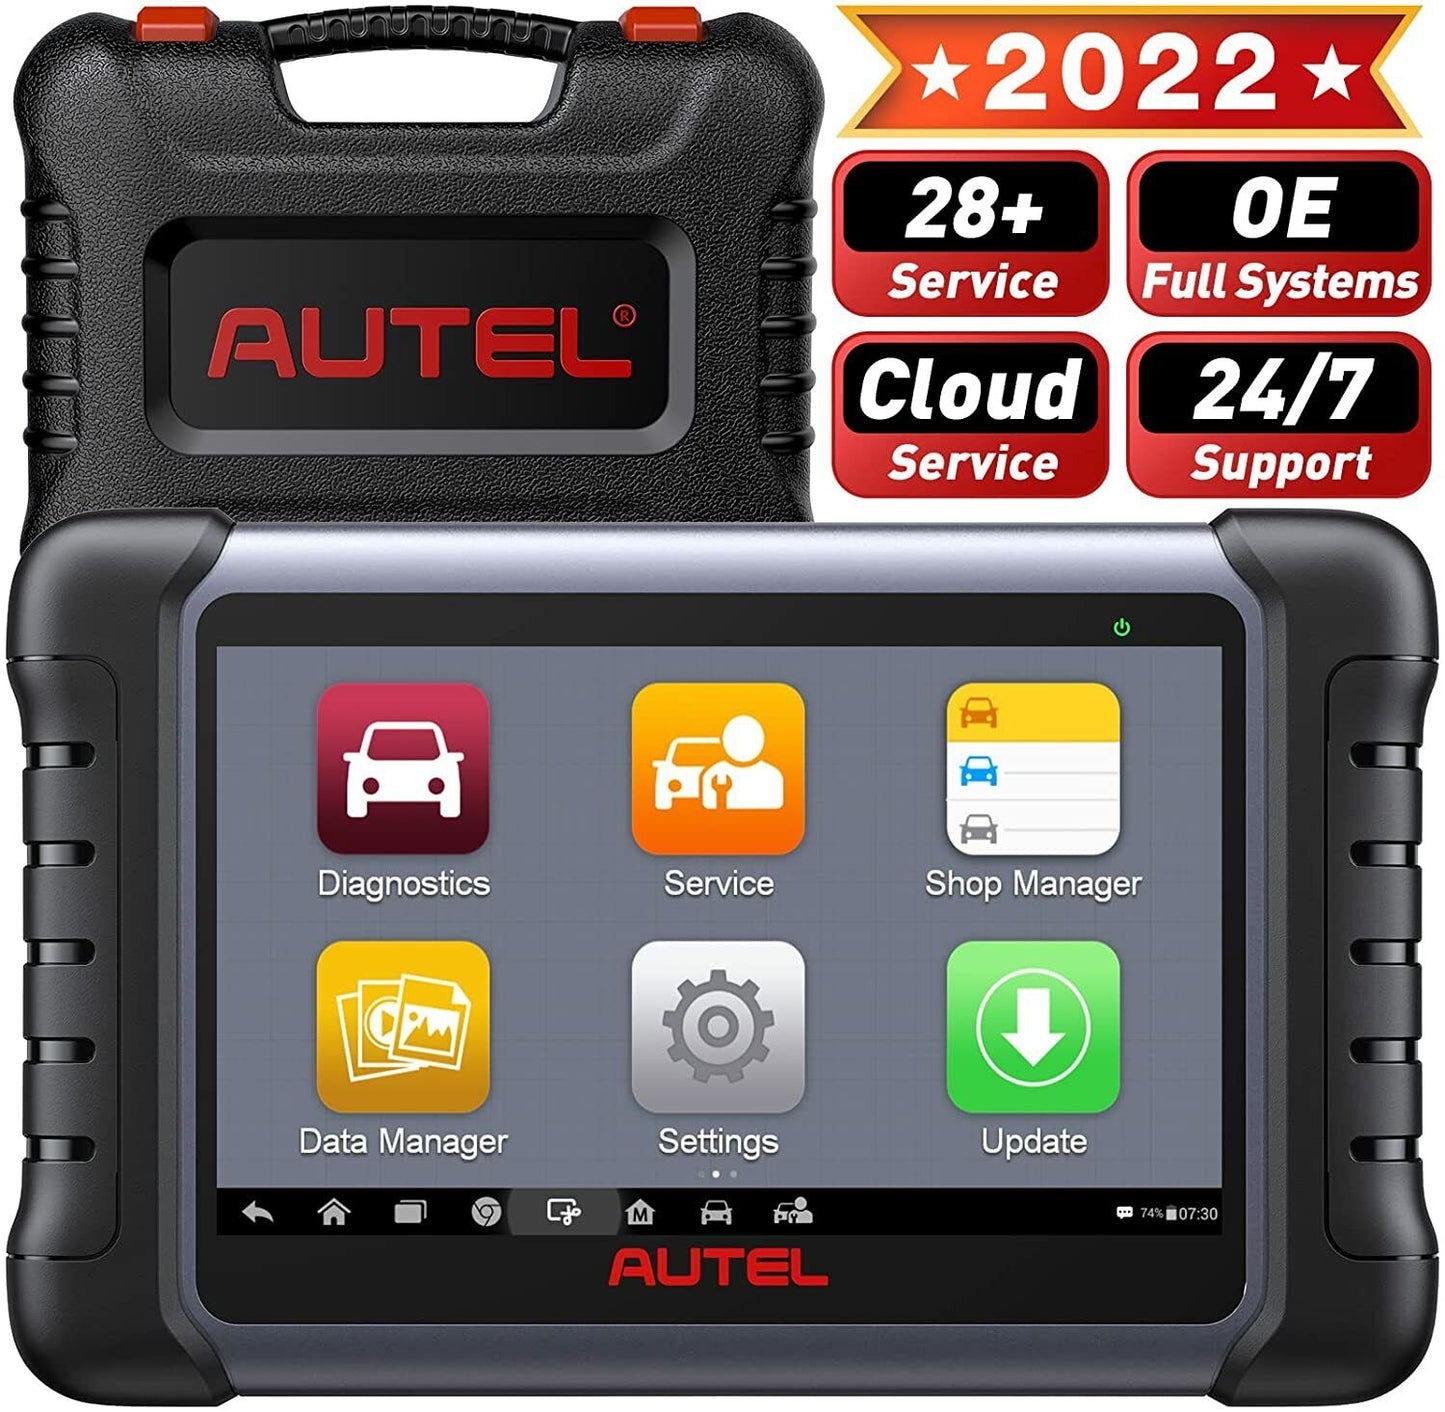 2022 Autel MaxiCheck MX808 Full System Diagnostic & Service Scan Tool Newly Adds Active Test